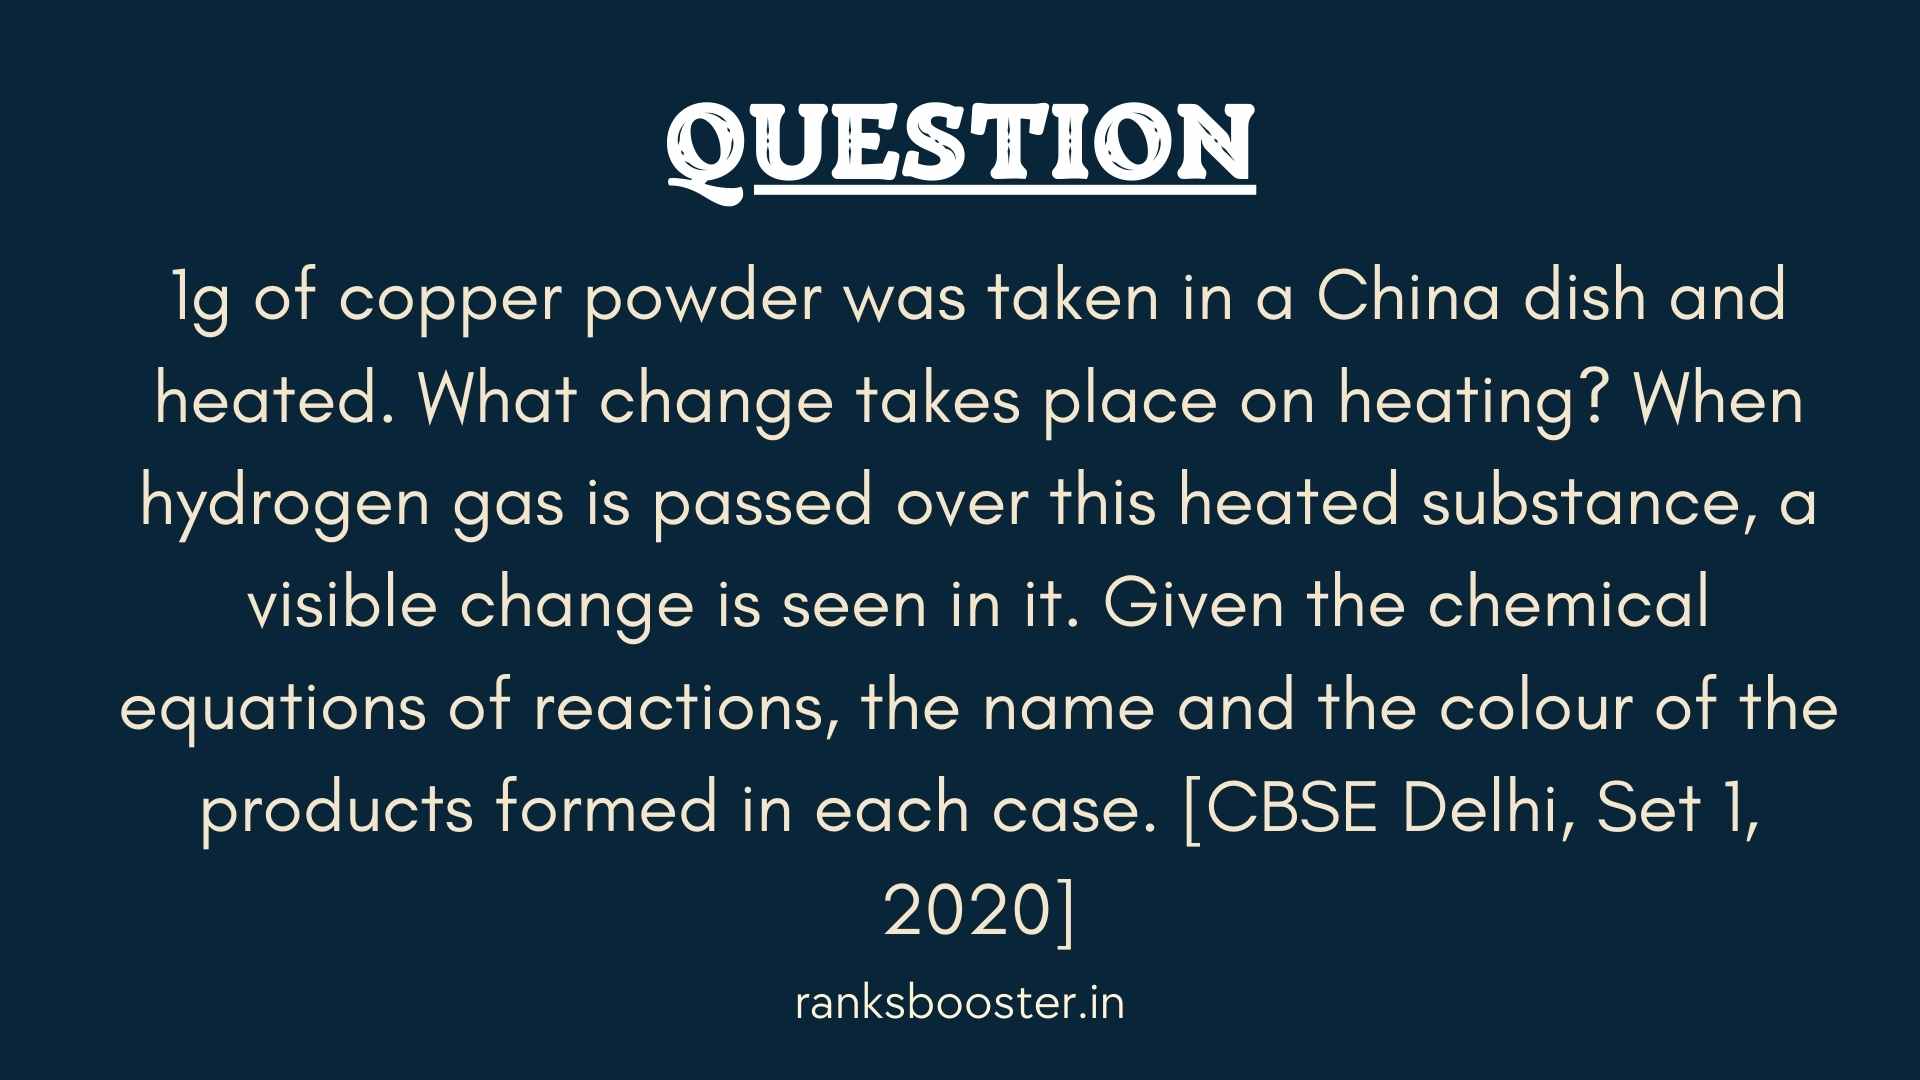 1g of copper powder was taken in a China dish and heated. What change takes place on heating? When hydrogen gas is passed over this heated substance, a visible change is seen in it. Given the chemical equations of reactions, the name and the colour of the products formed in each case